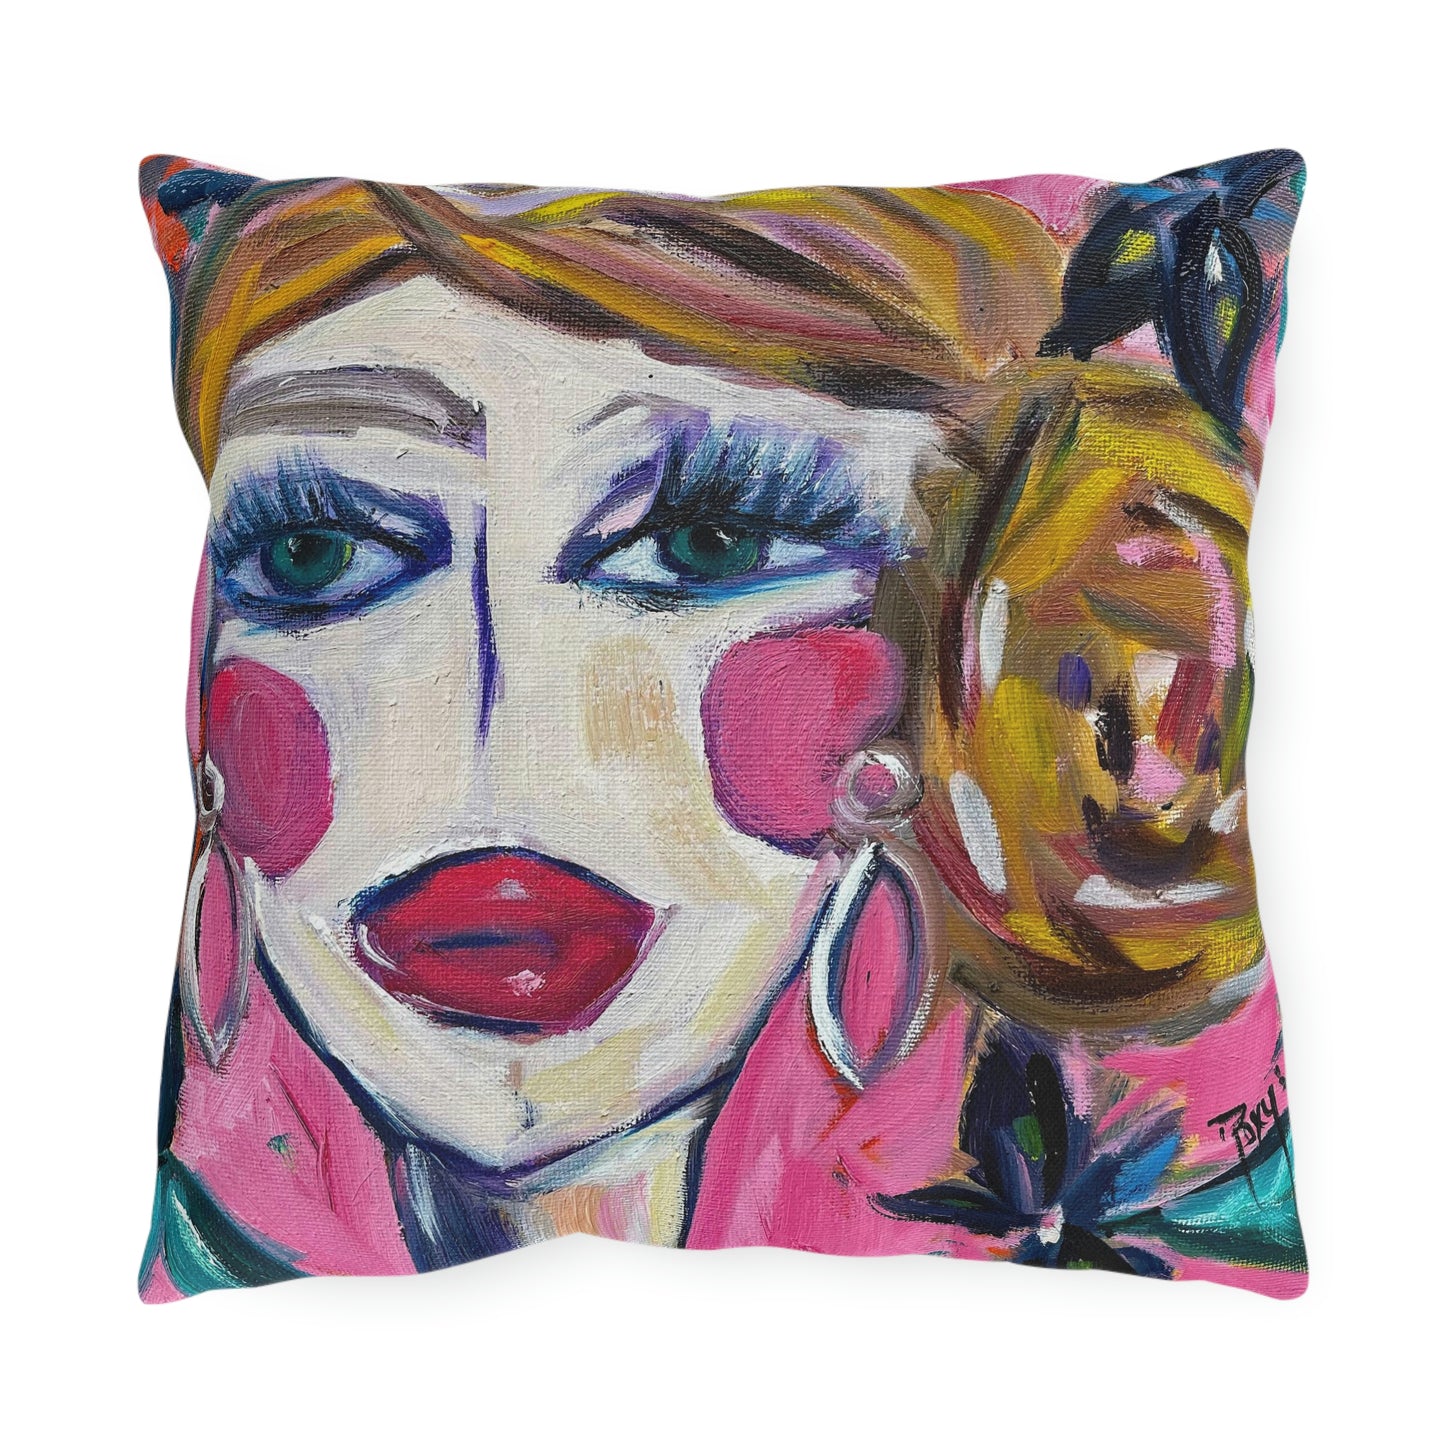 Lady with Irises Outdoor Pillows